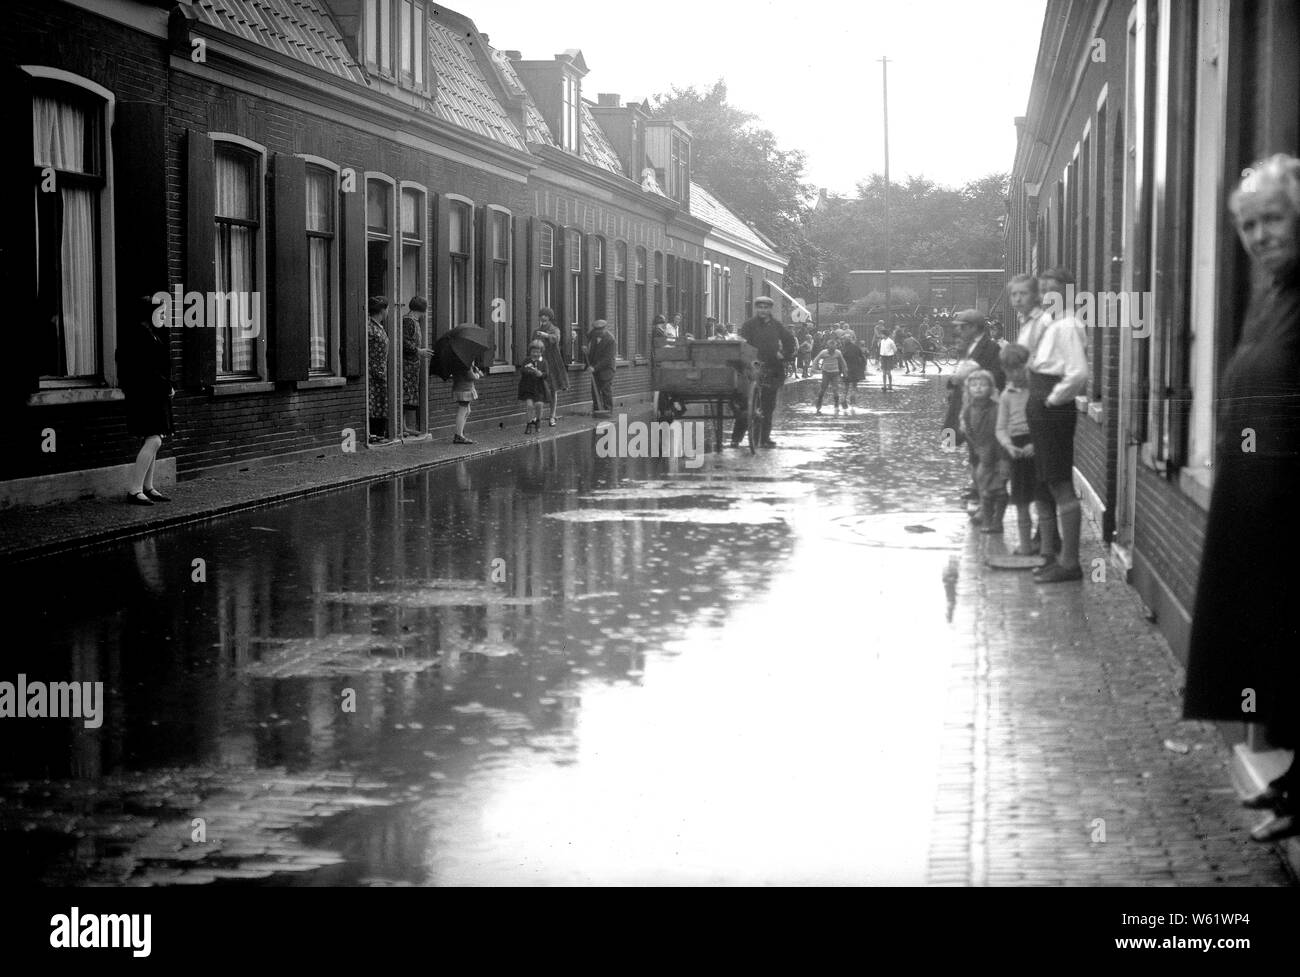 Netherlands history - street scene in a city in the Netherlands after a rain ca. 1930 Stock Photo